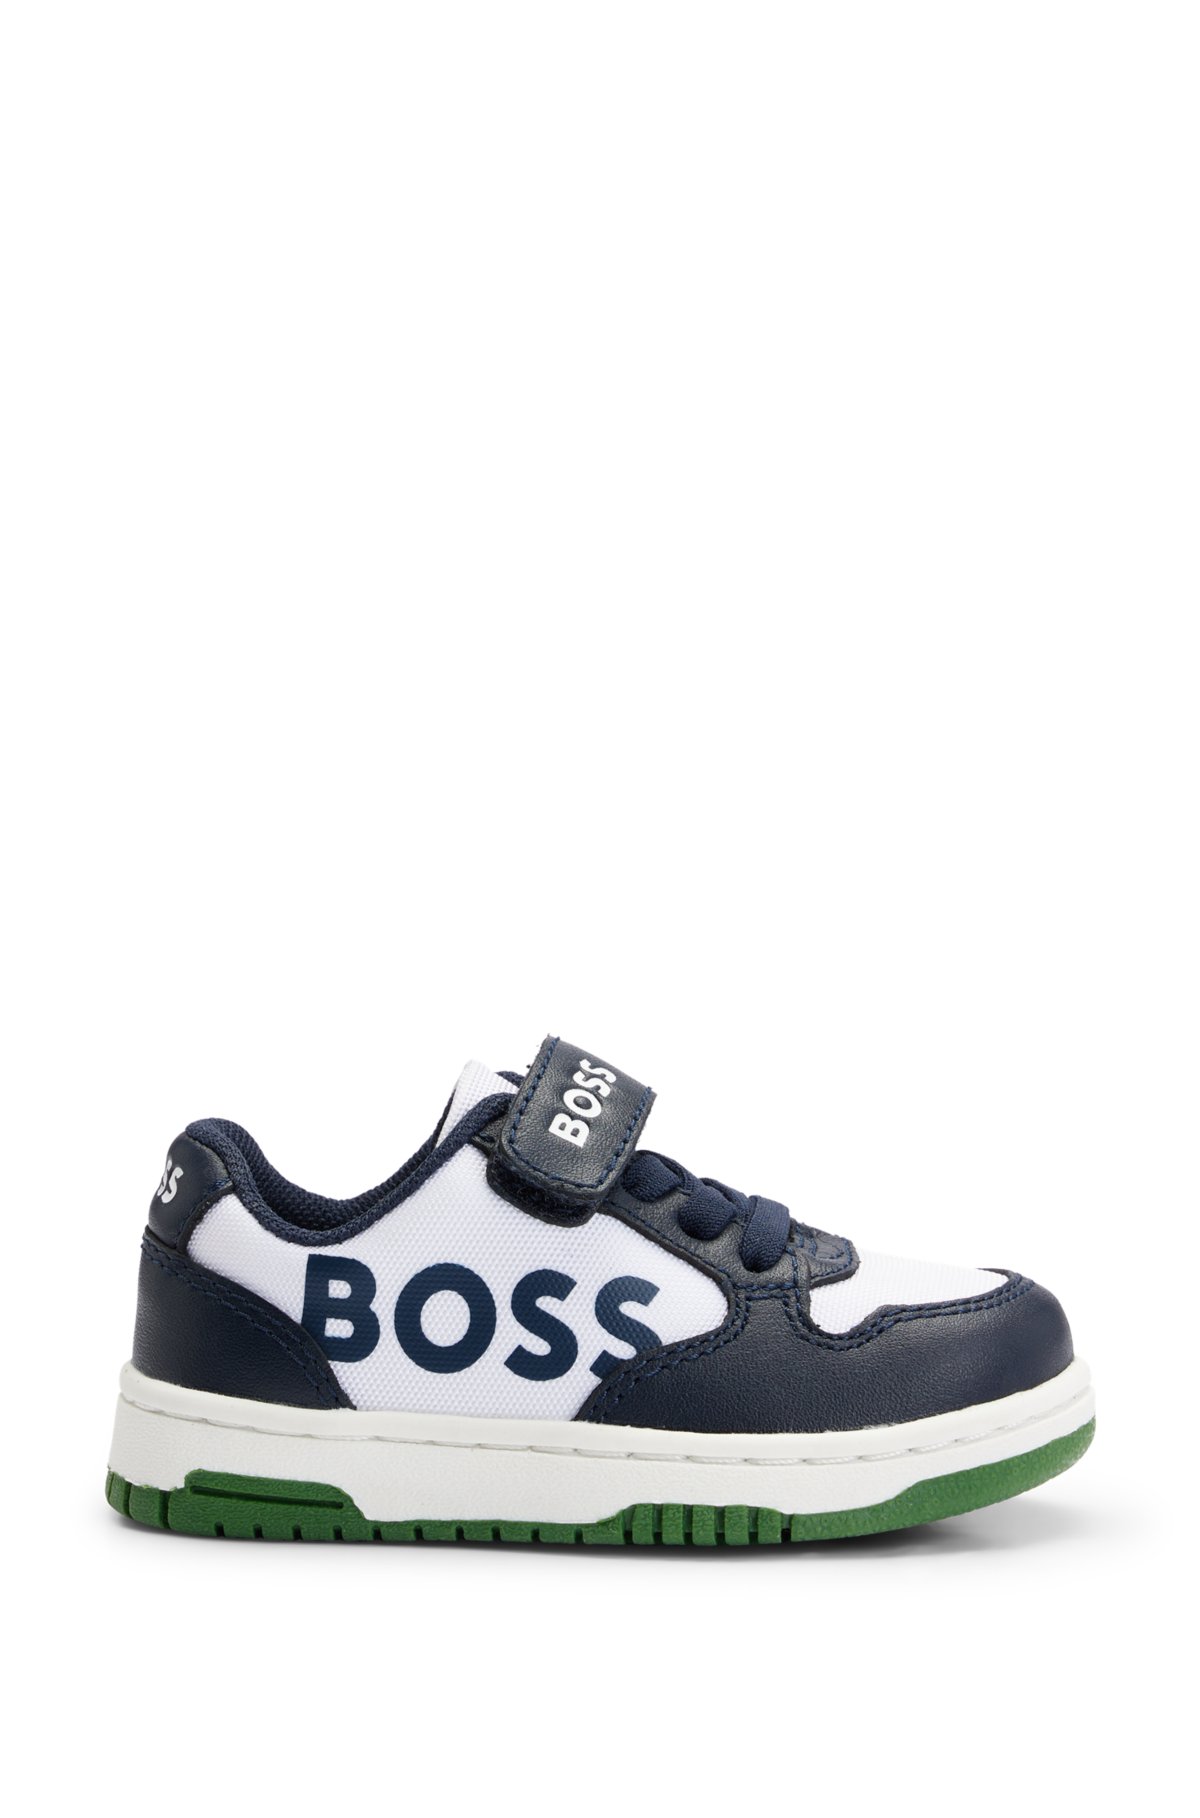 Kids' trainers in canvas and leather with branded strap, Dark Blue